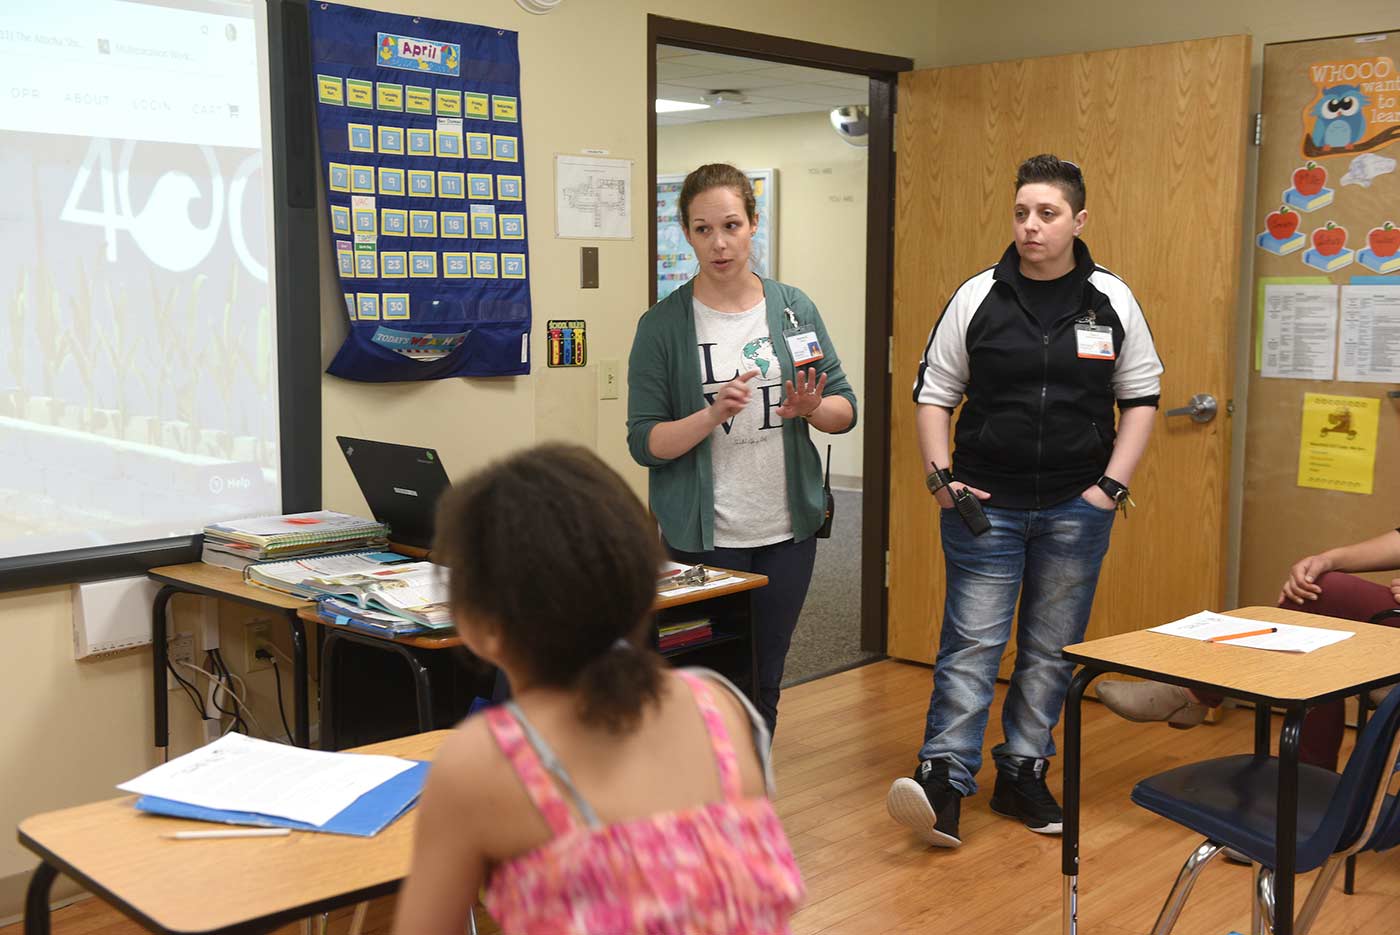 Two Natchaug teachers talk to students in the front of a classroom